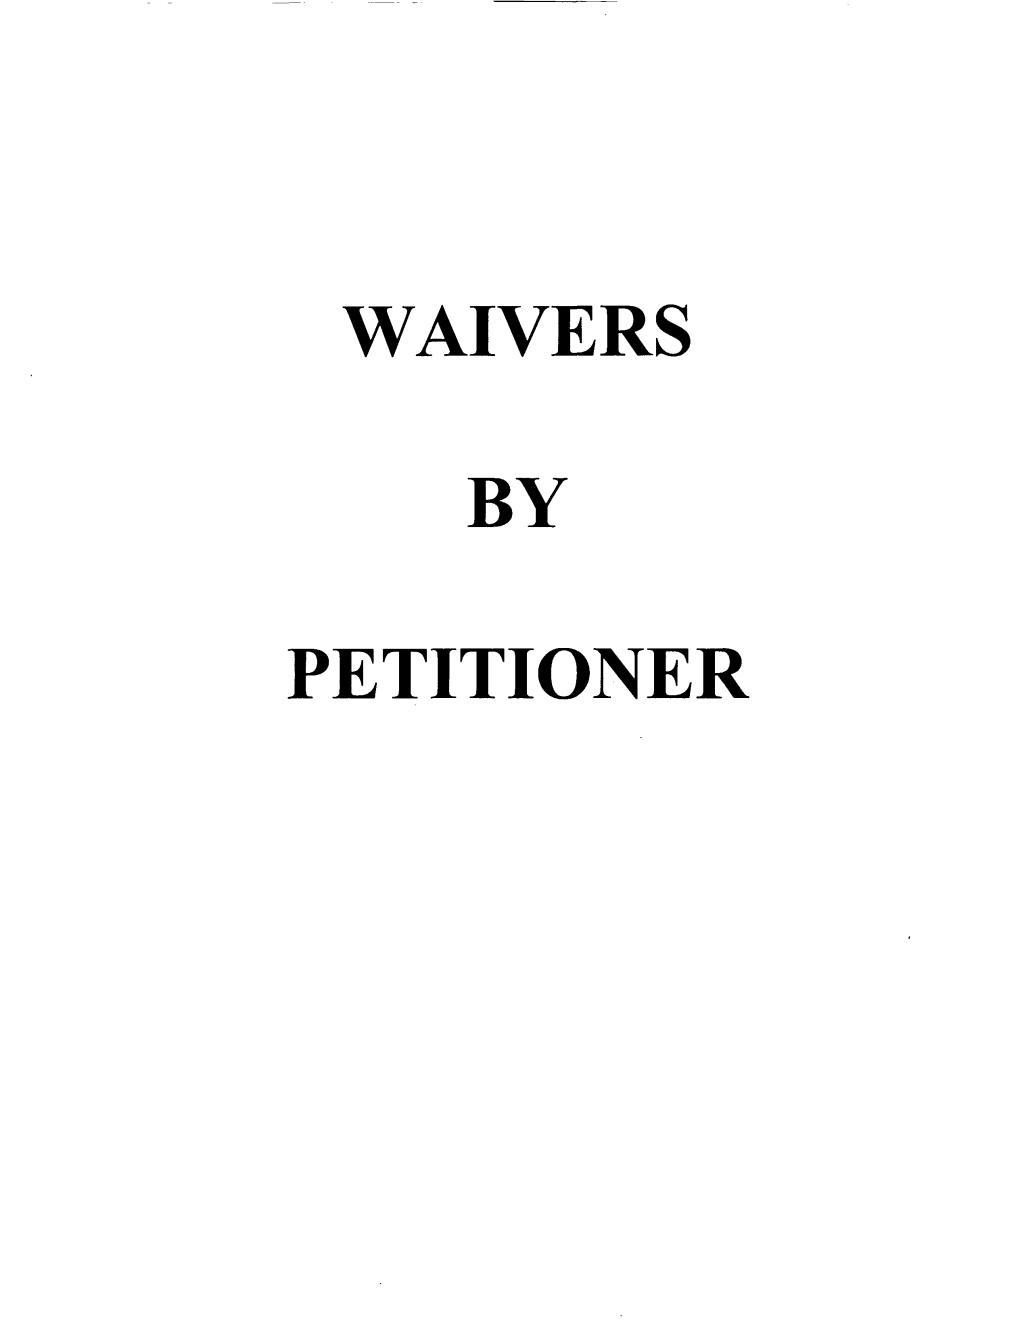 Waivers by Petitioner